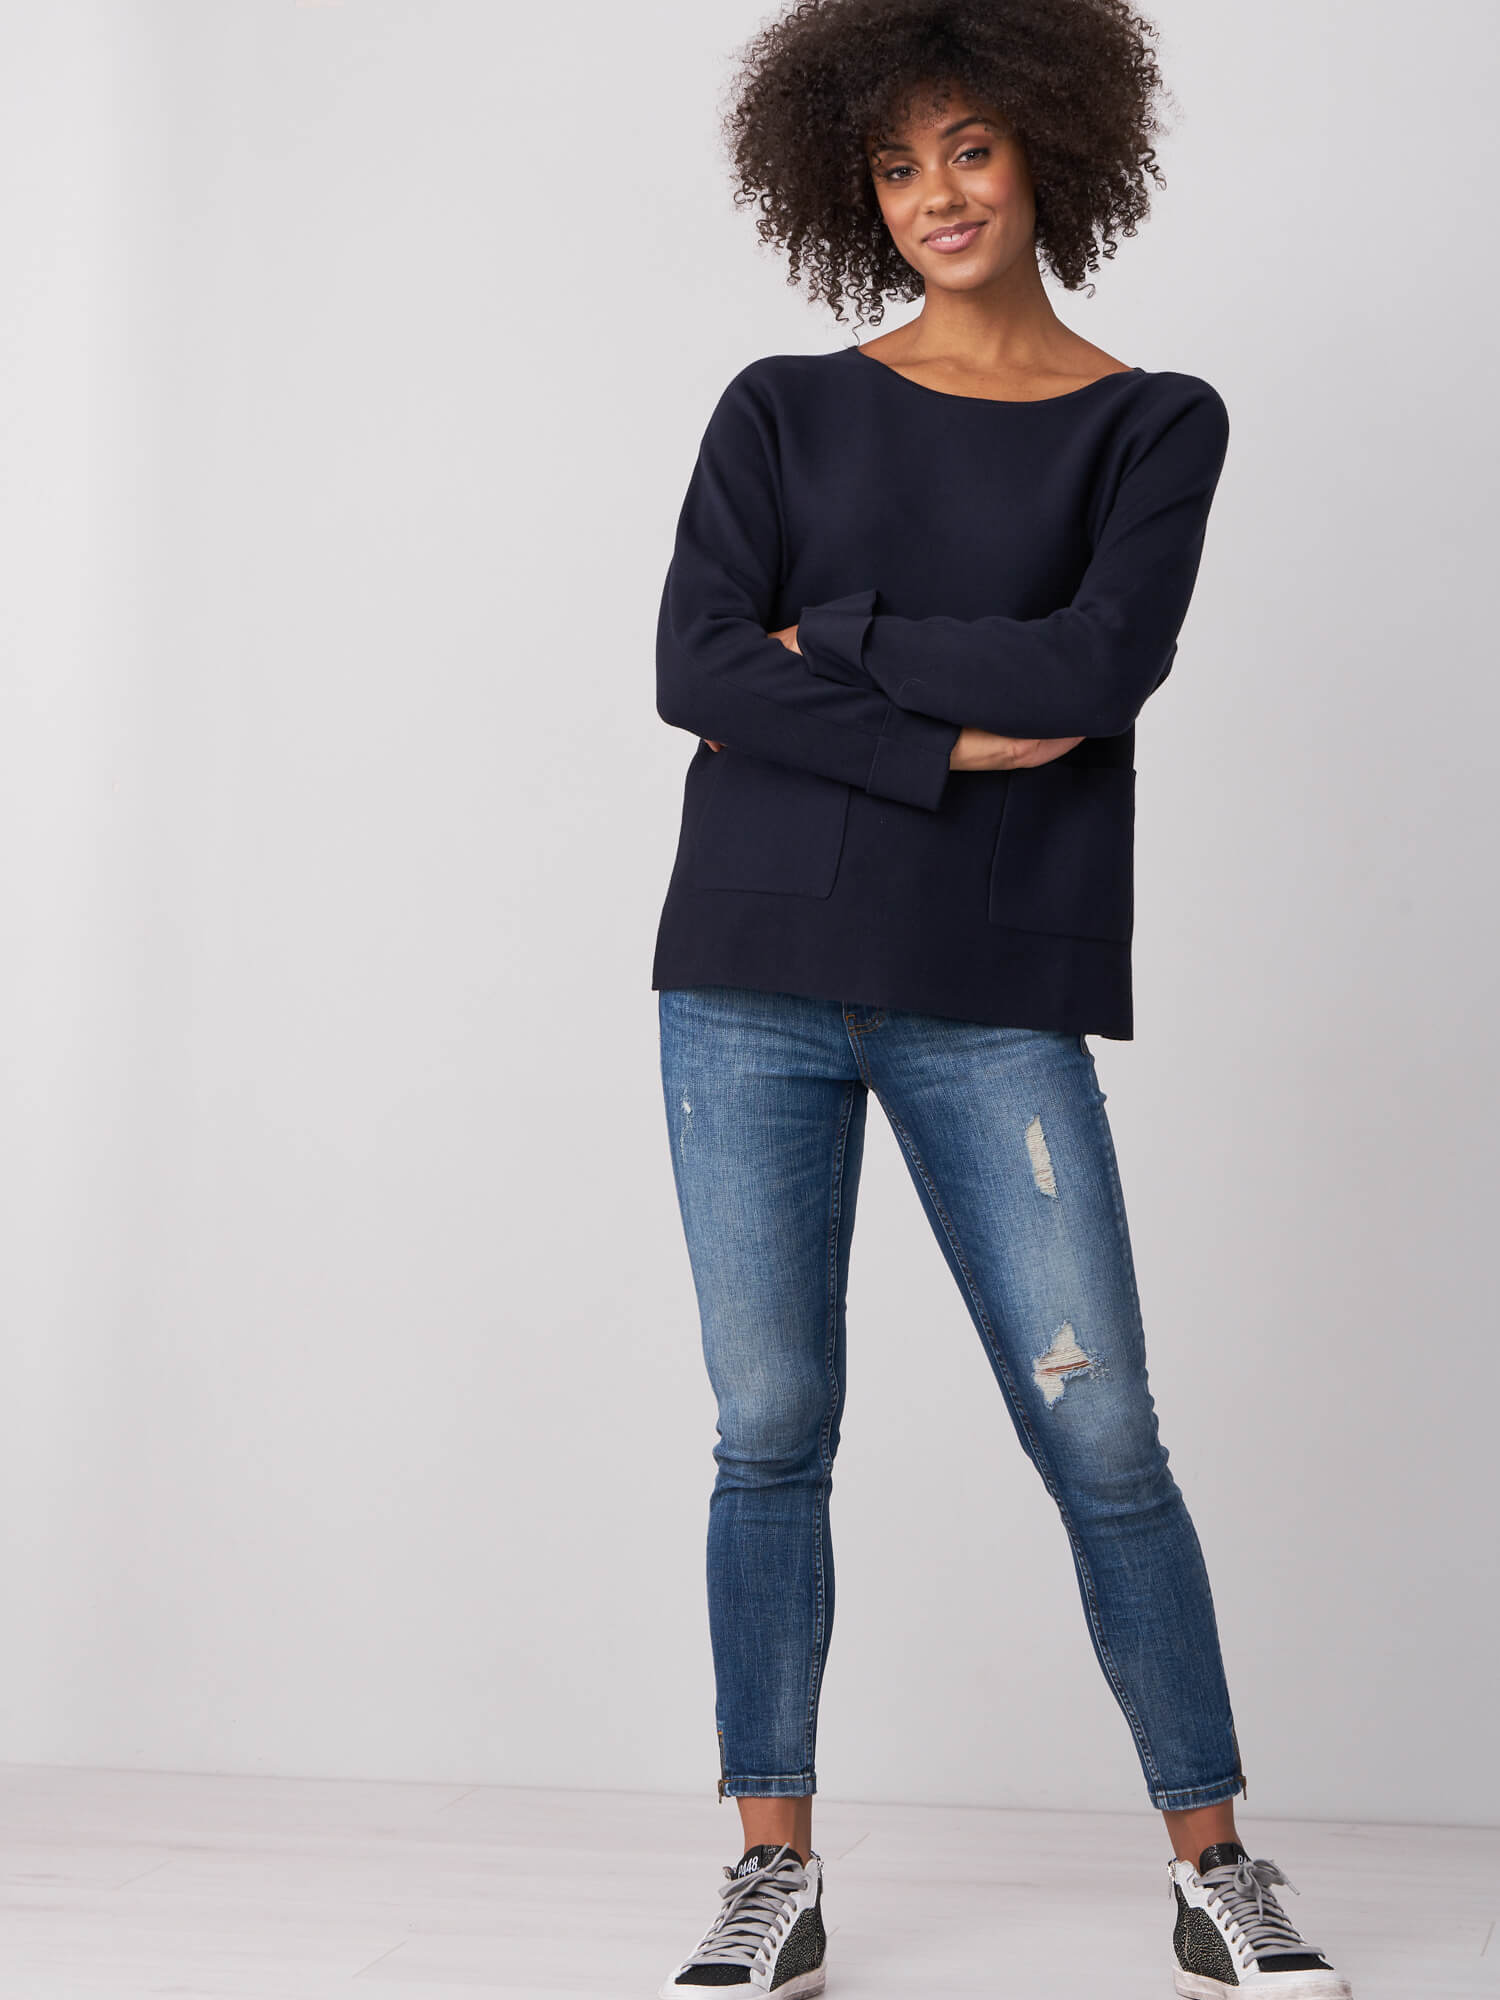 Sweater With Pockets - Sonia's Runway